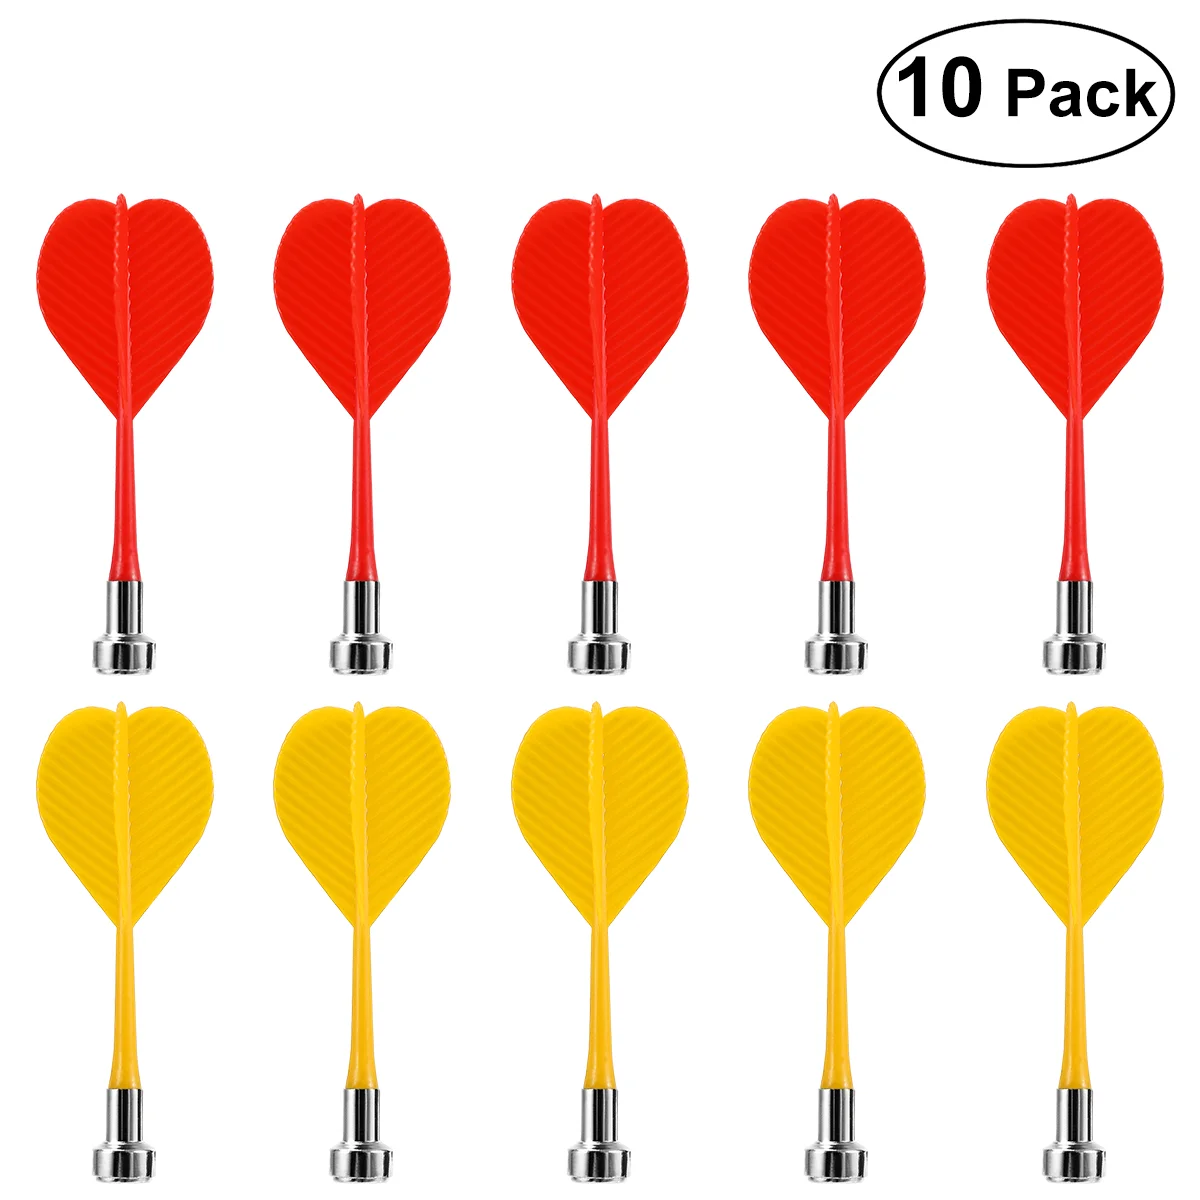 NUOLUX 10pcs Replacement Durable Safe Plastic Wing Magnetic Darts Bullseye Game Toys (Red & Yellow) 10pcs m4 m5 m6 m8 m10 m12 and white nylon butterfly nut ingot plastic wing nuts